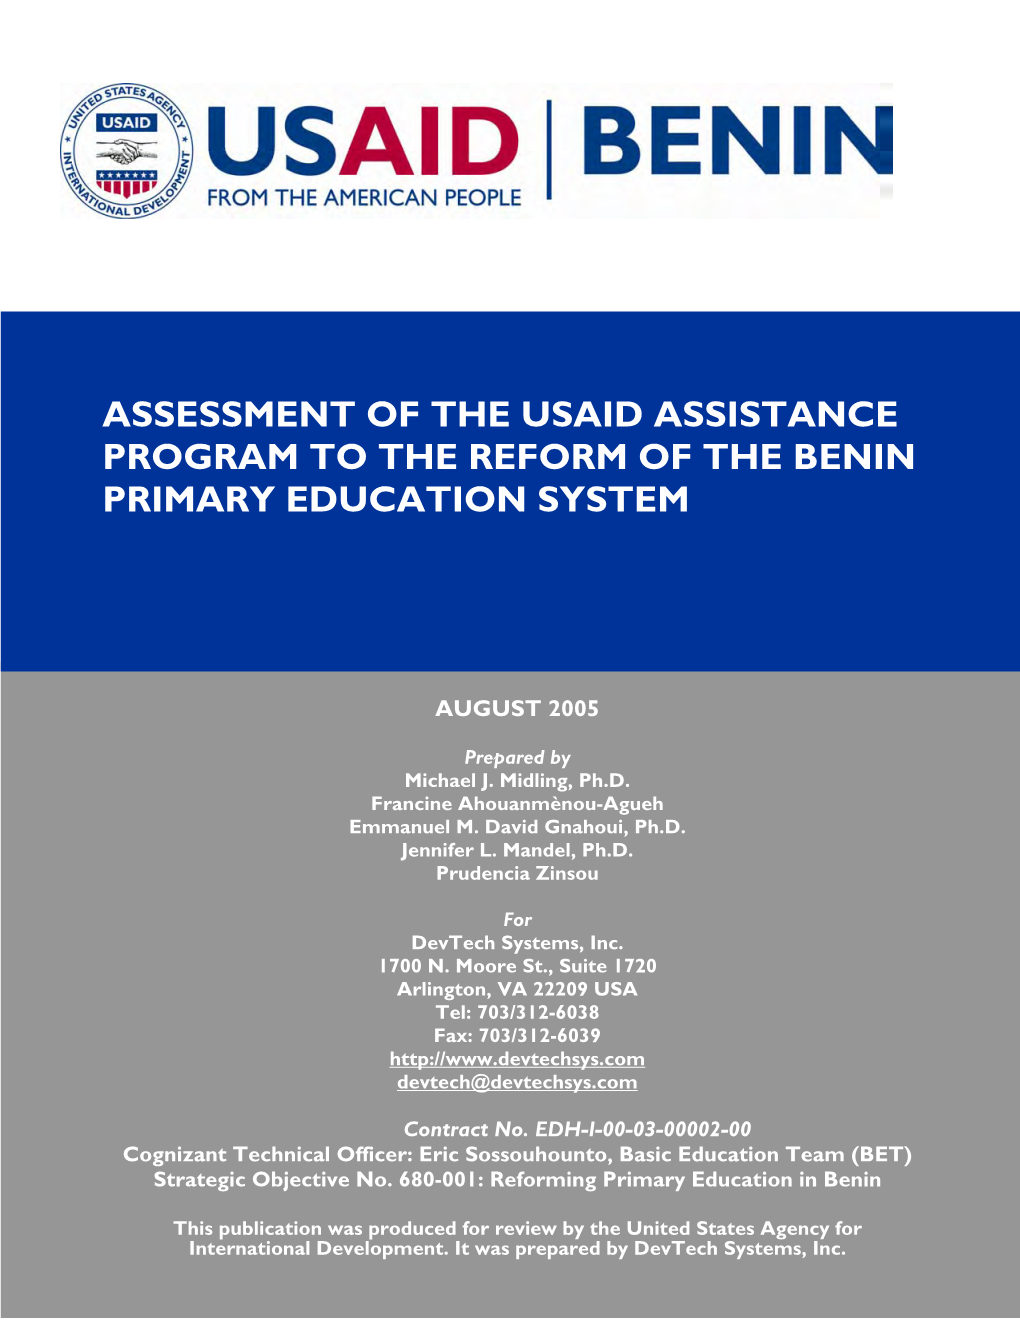 Assessment of the Usaid Assistance Program to the Reform of the Benin Primary Education System